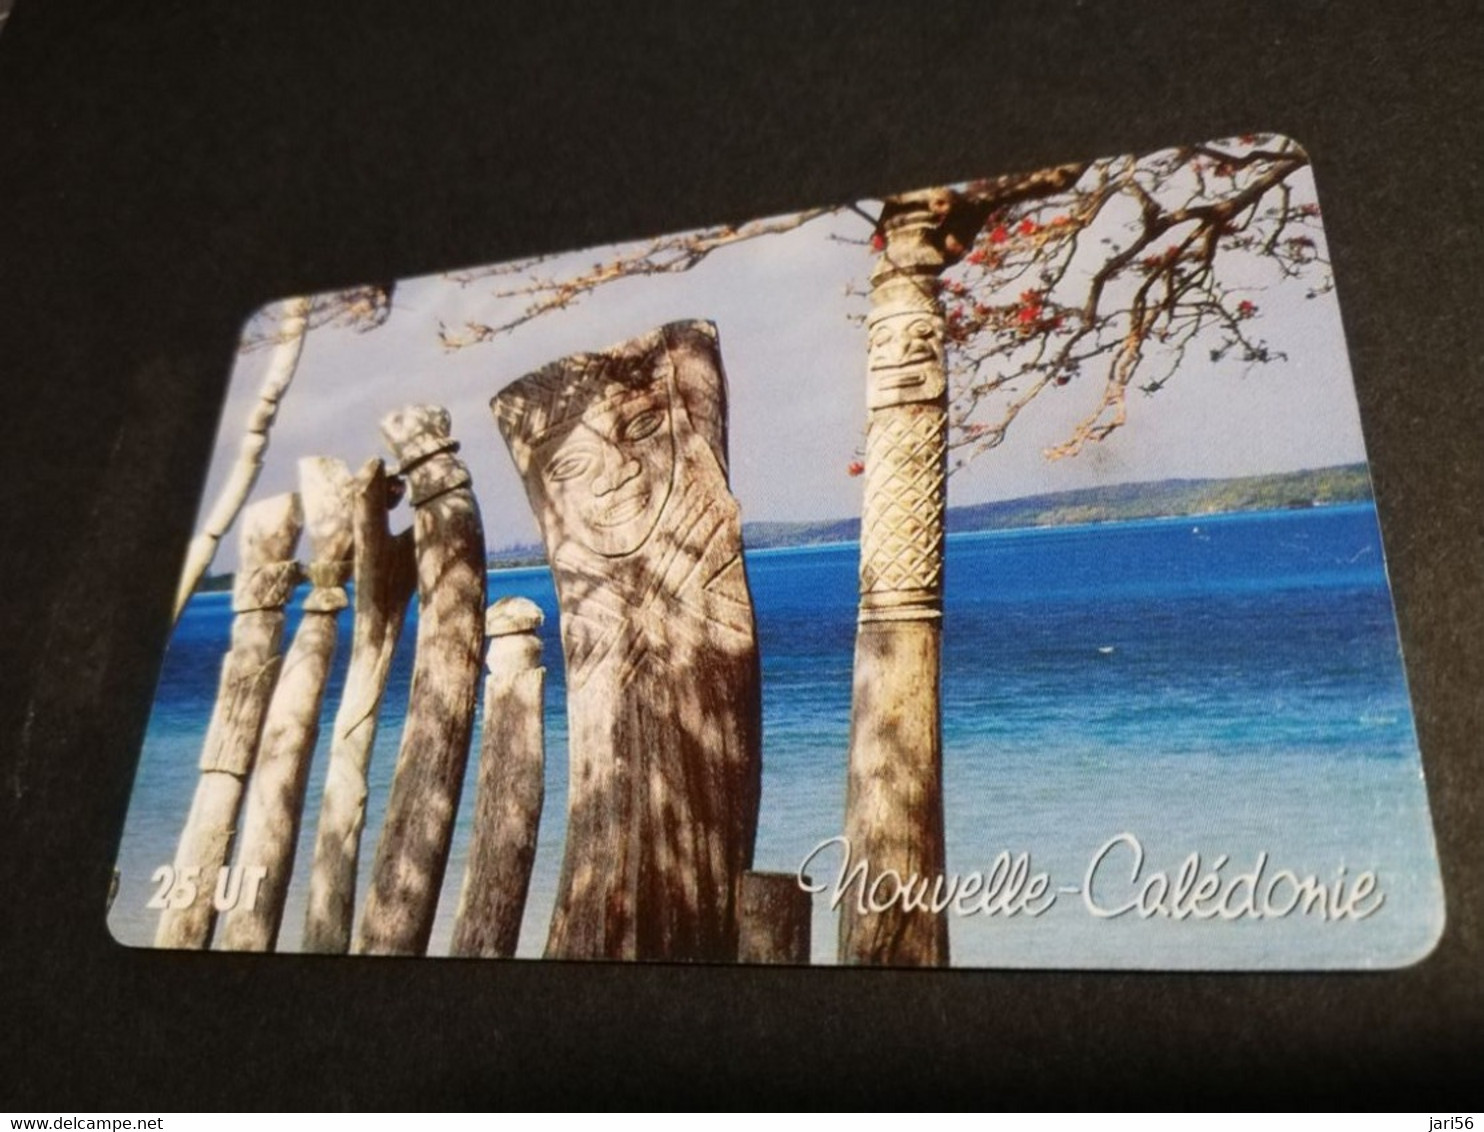 NOUVELLE CALEDONIA  CHIP CARD 25  UNITS  CARVED TREES AT BEACH         ** 4193 ** - Nuova Caledonia